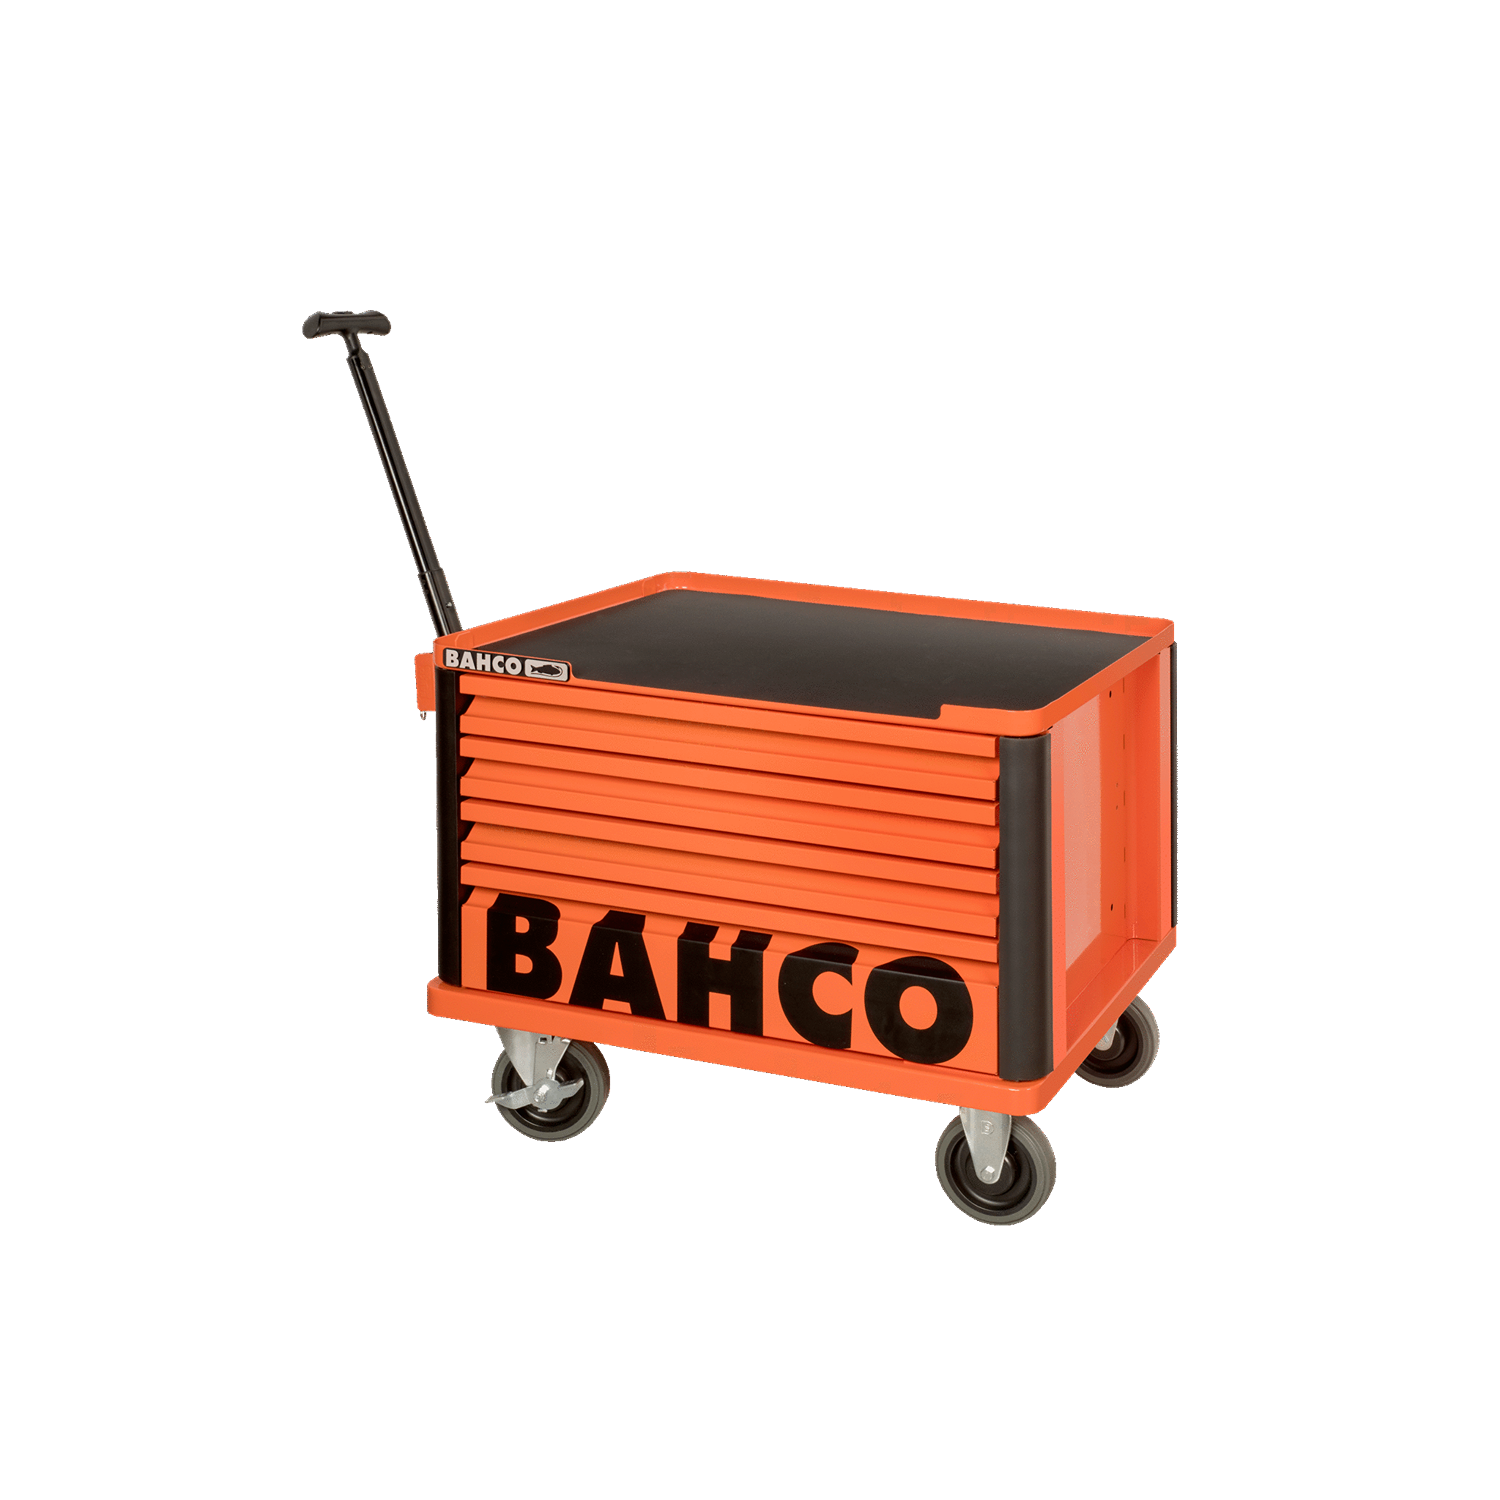 BAHCO 1482K4W 26” E72 Storage HUB Top Chests on Wheels - Premium Storage HUB from BAHCO - Shop now at Yew Aik.